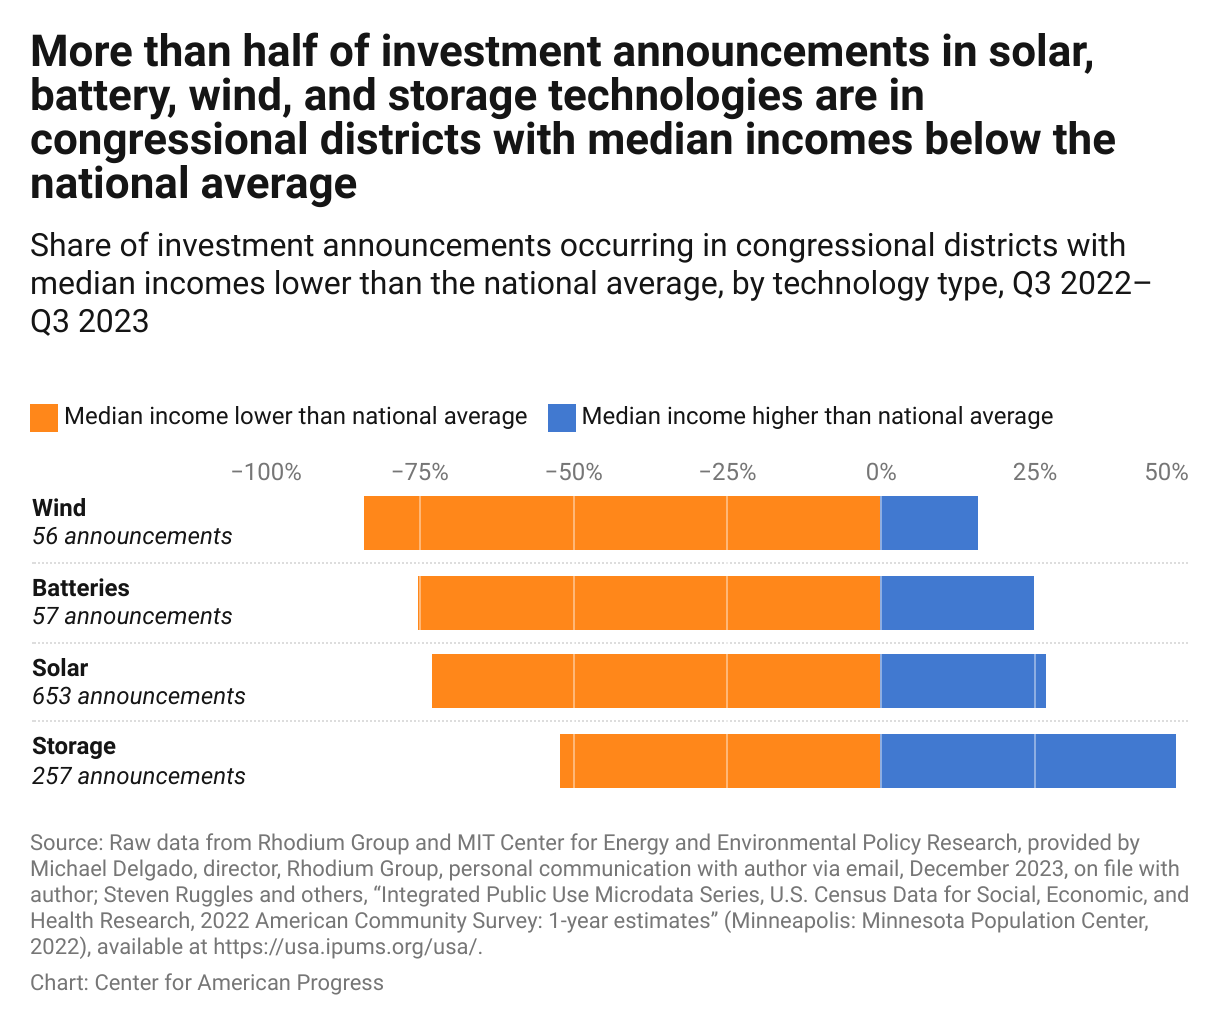 Bar graph that shows a larger share of investment announcements (in wind, solar, batteries, and storage) in congressional districts with median incomes lower than the national average than in districts with median incomes higher than the national average.